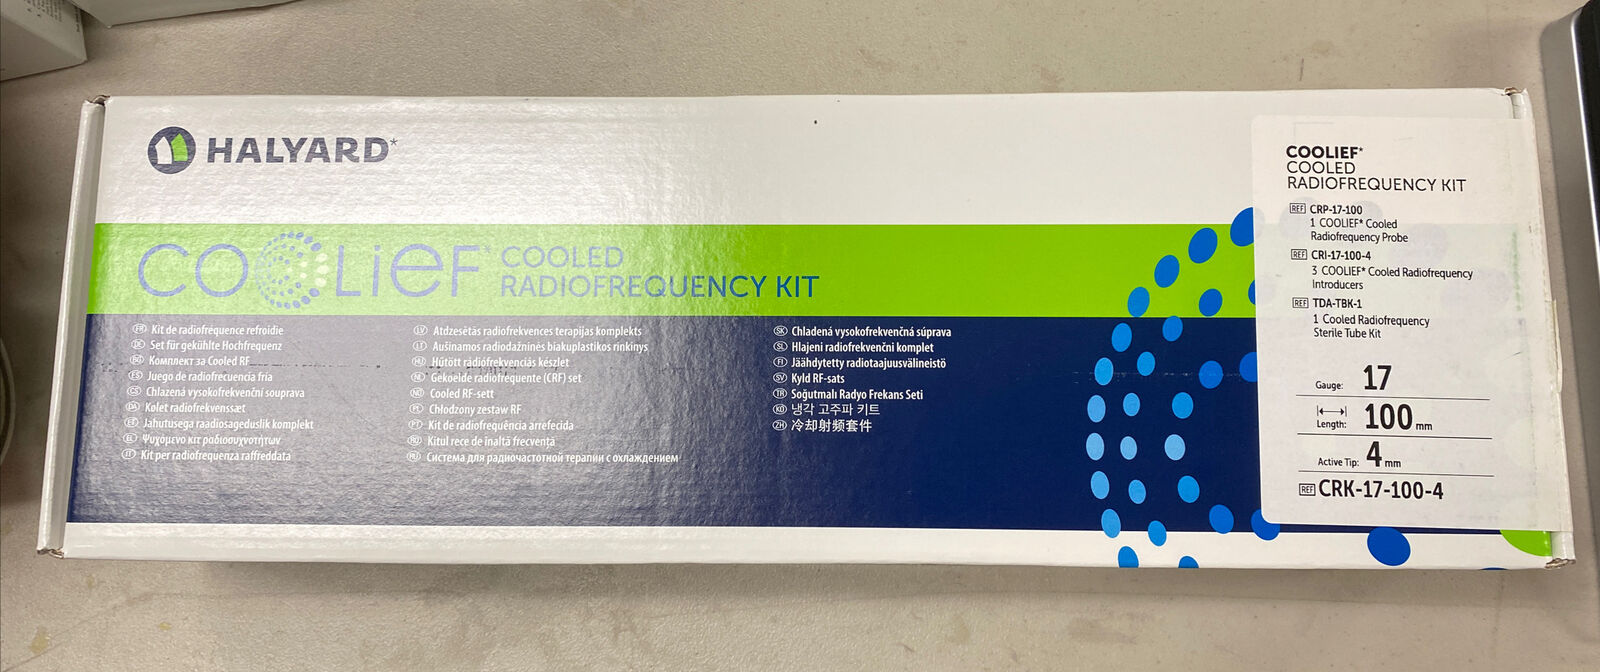 Halyard Coolief Radiofrequency Kit - Model CRK-17-100-4